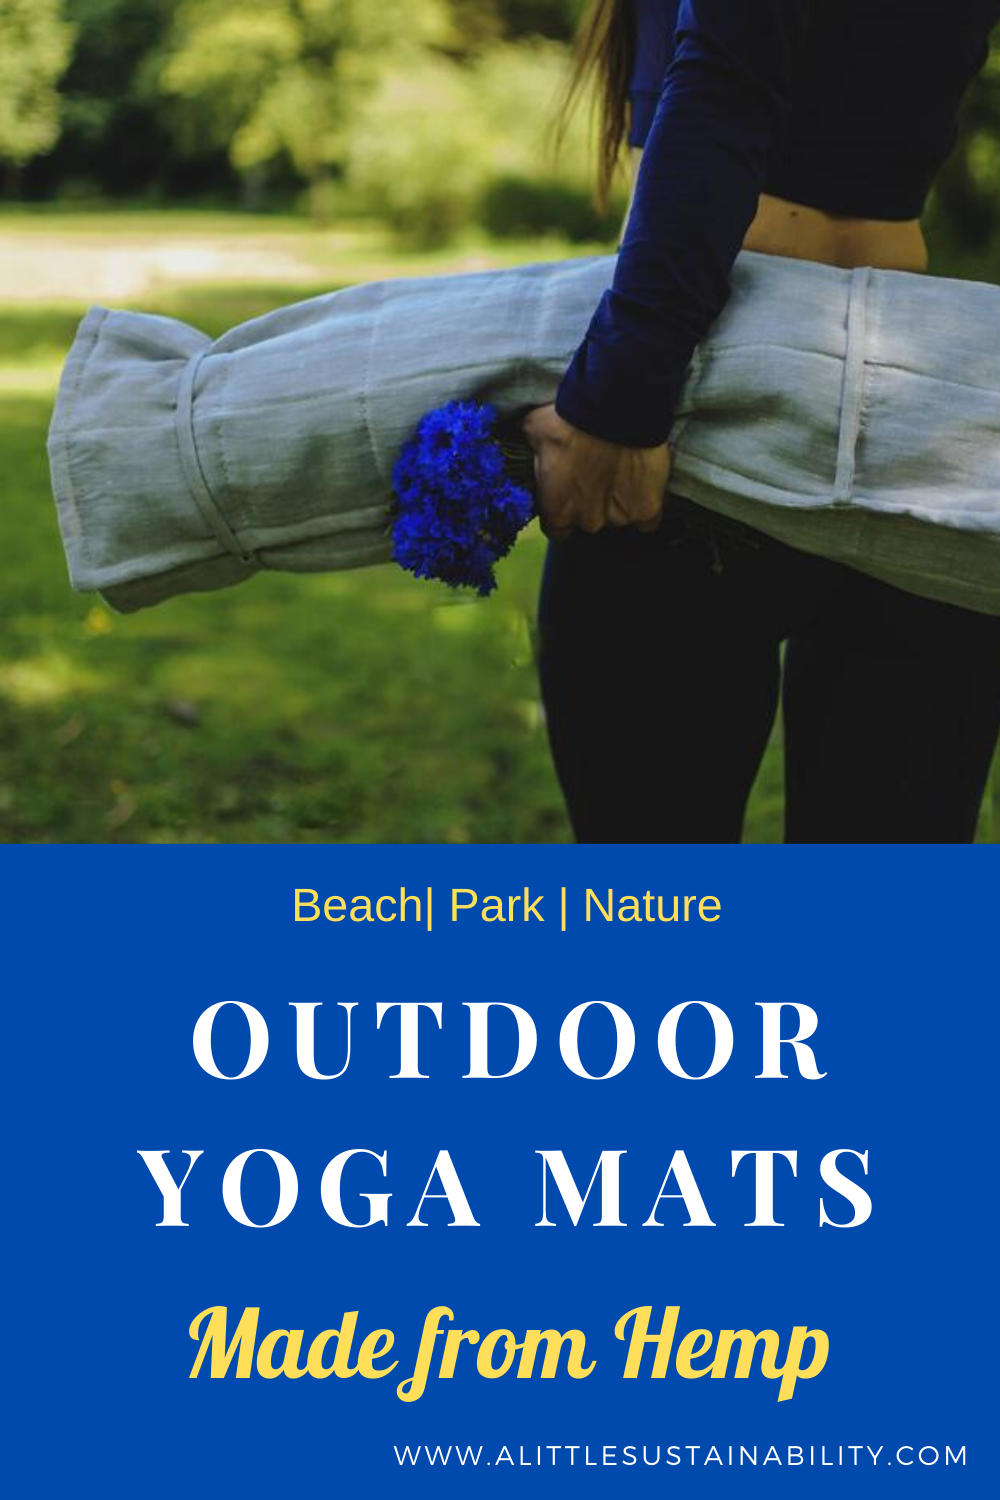 Hemp yoga mats are ideal for an outdoor practice like yoga in the park, beach yoga, or nature yoga. These sustainable mats are organic and non-toxic made from hemp which is an extremely eco-friendly material.  Learn more at www.alittlesustainability.com